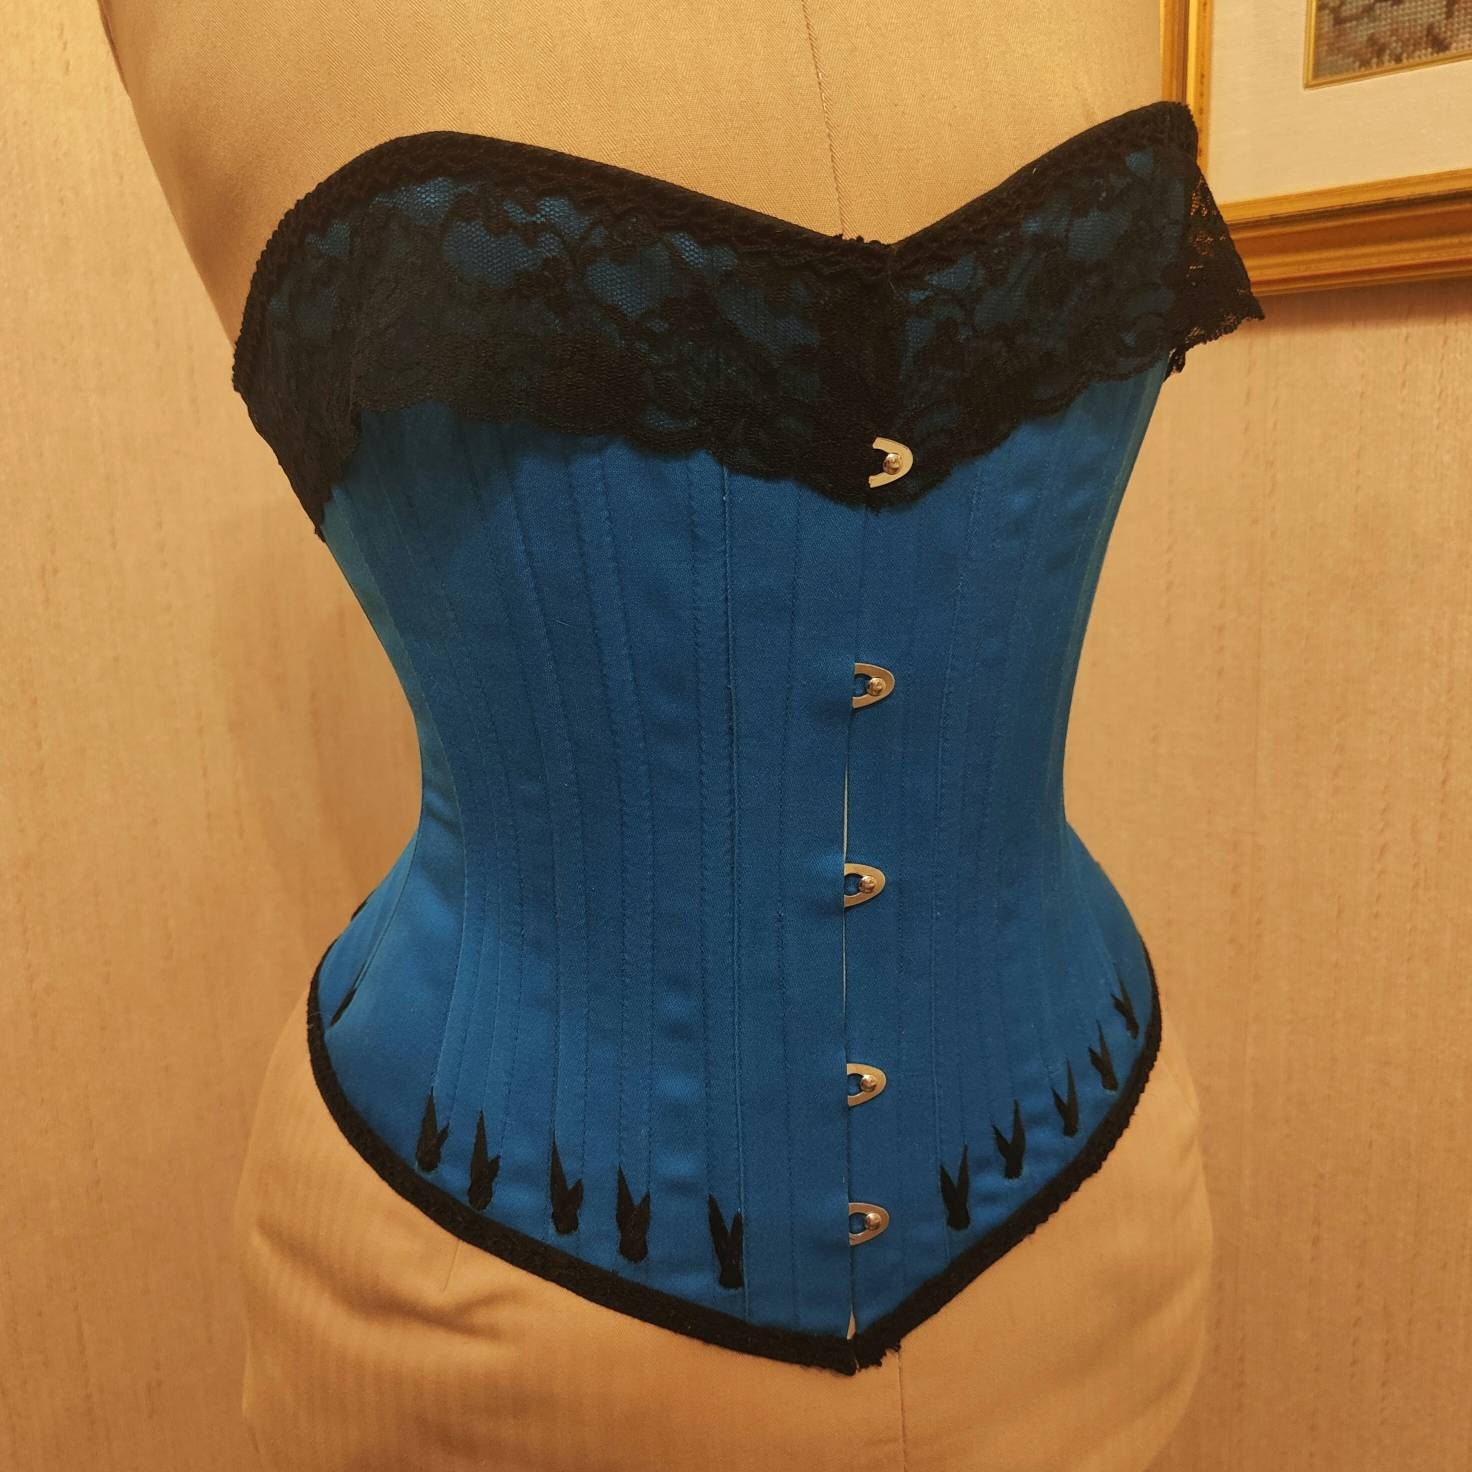 Custom-made Late Victorian Tightlacing Corset. Prototype Corset Step  Included, Made to Your Body Measurements. 